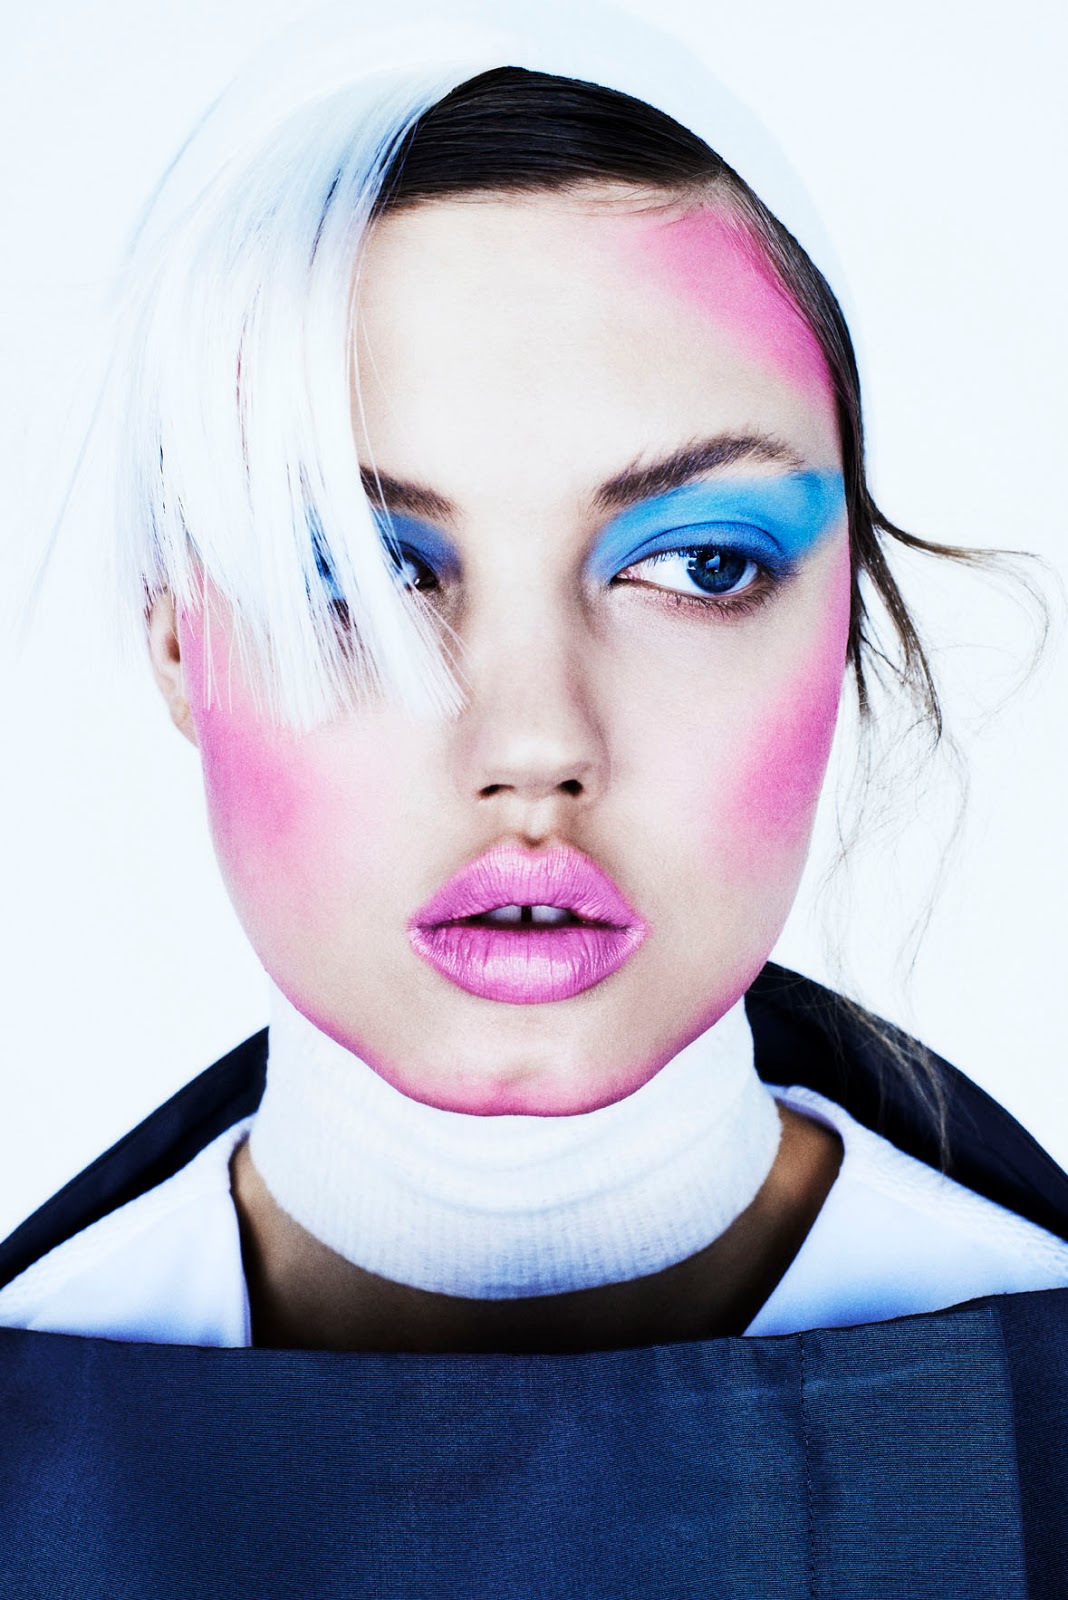 lindsey wixson by henrik bulow for fat issue d spring/summer 2014 ...